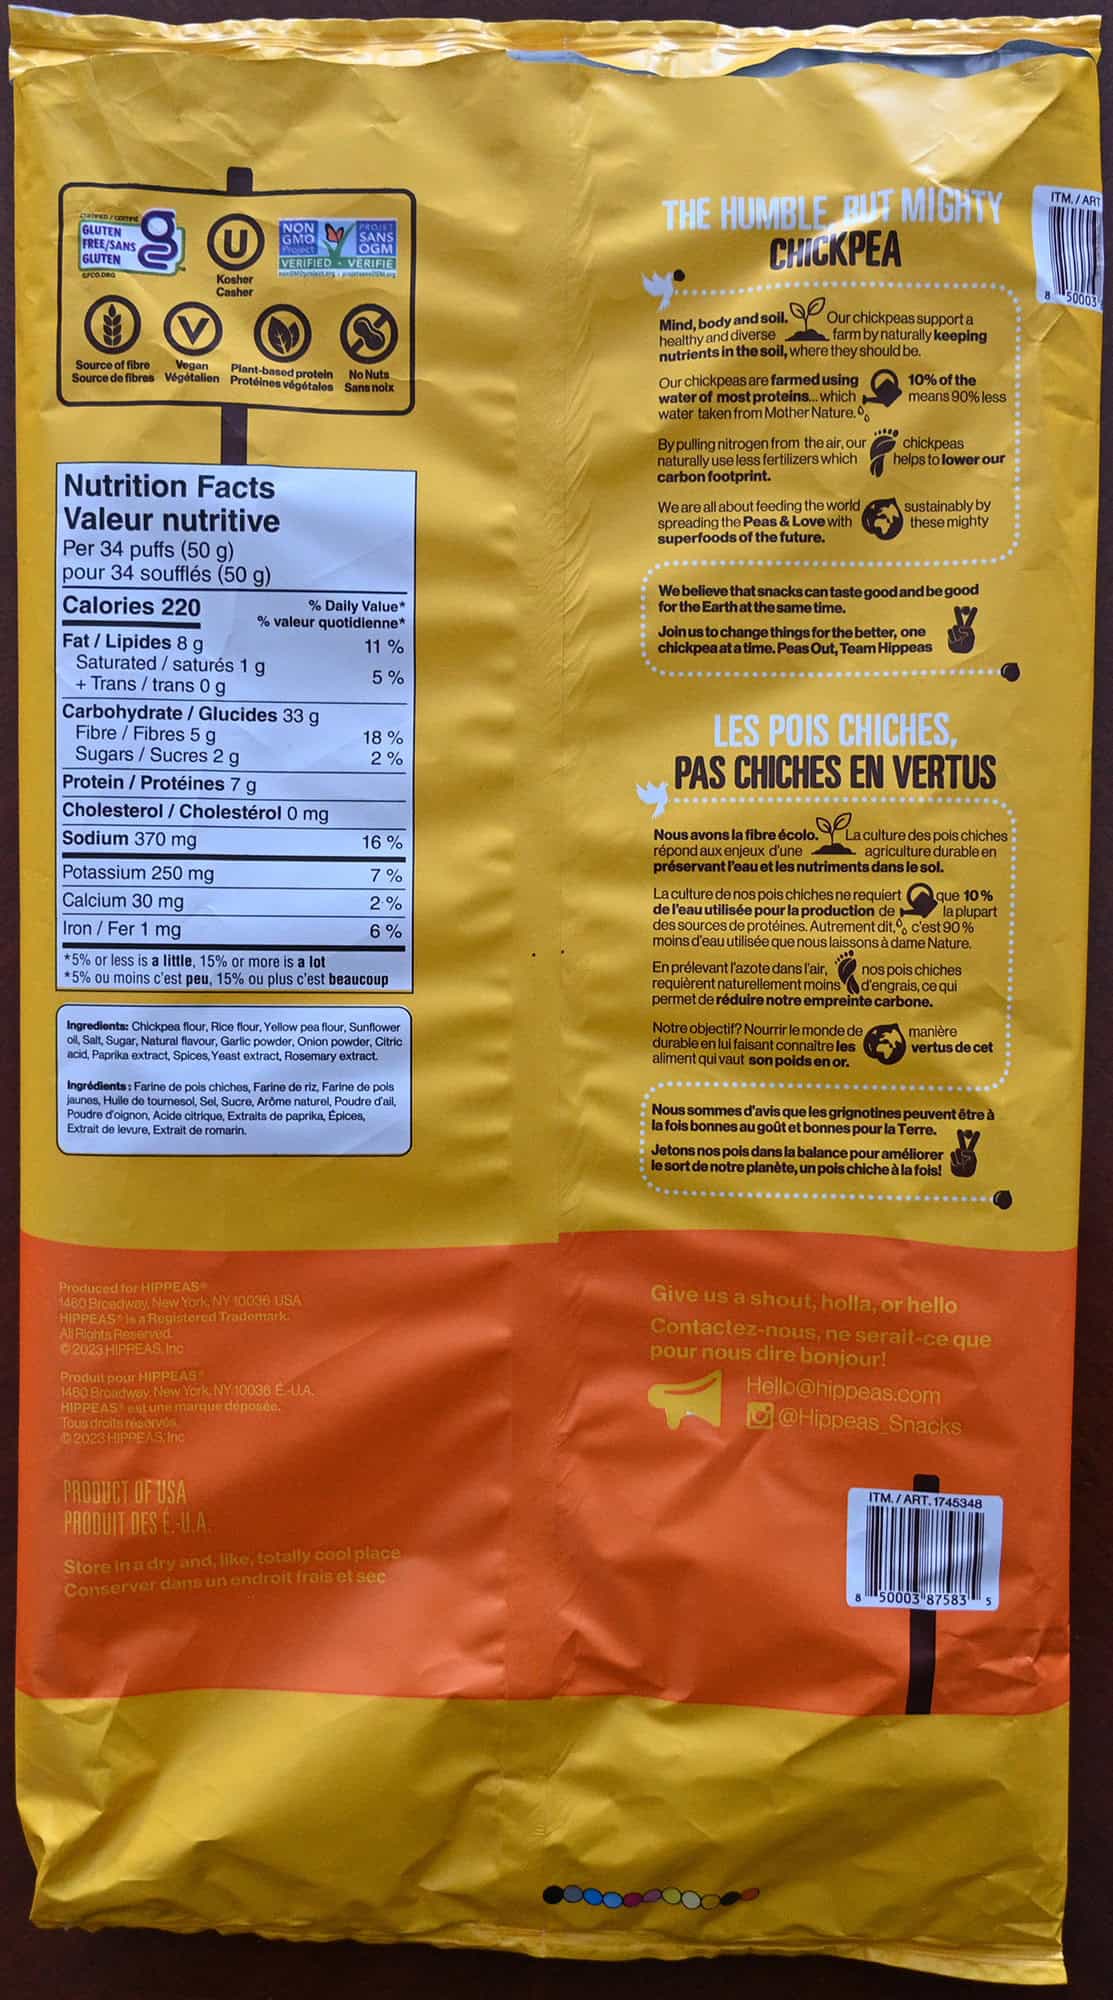 Image of the back of the bag of puffs showing ingredients, nutrition facts and health facts about the puffs.